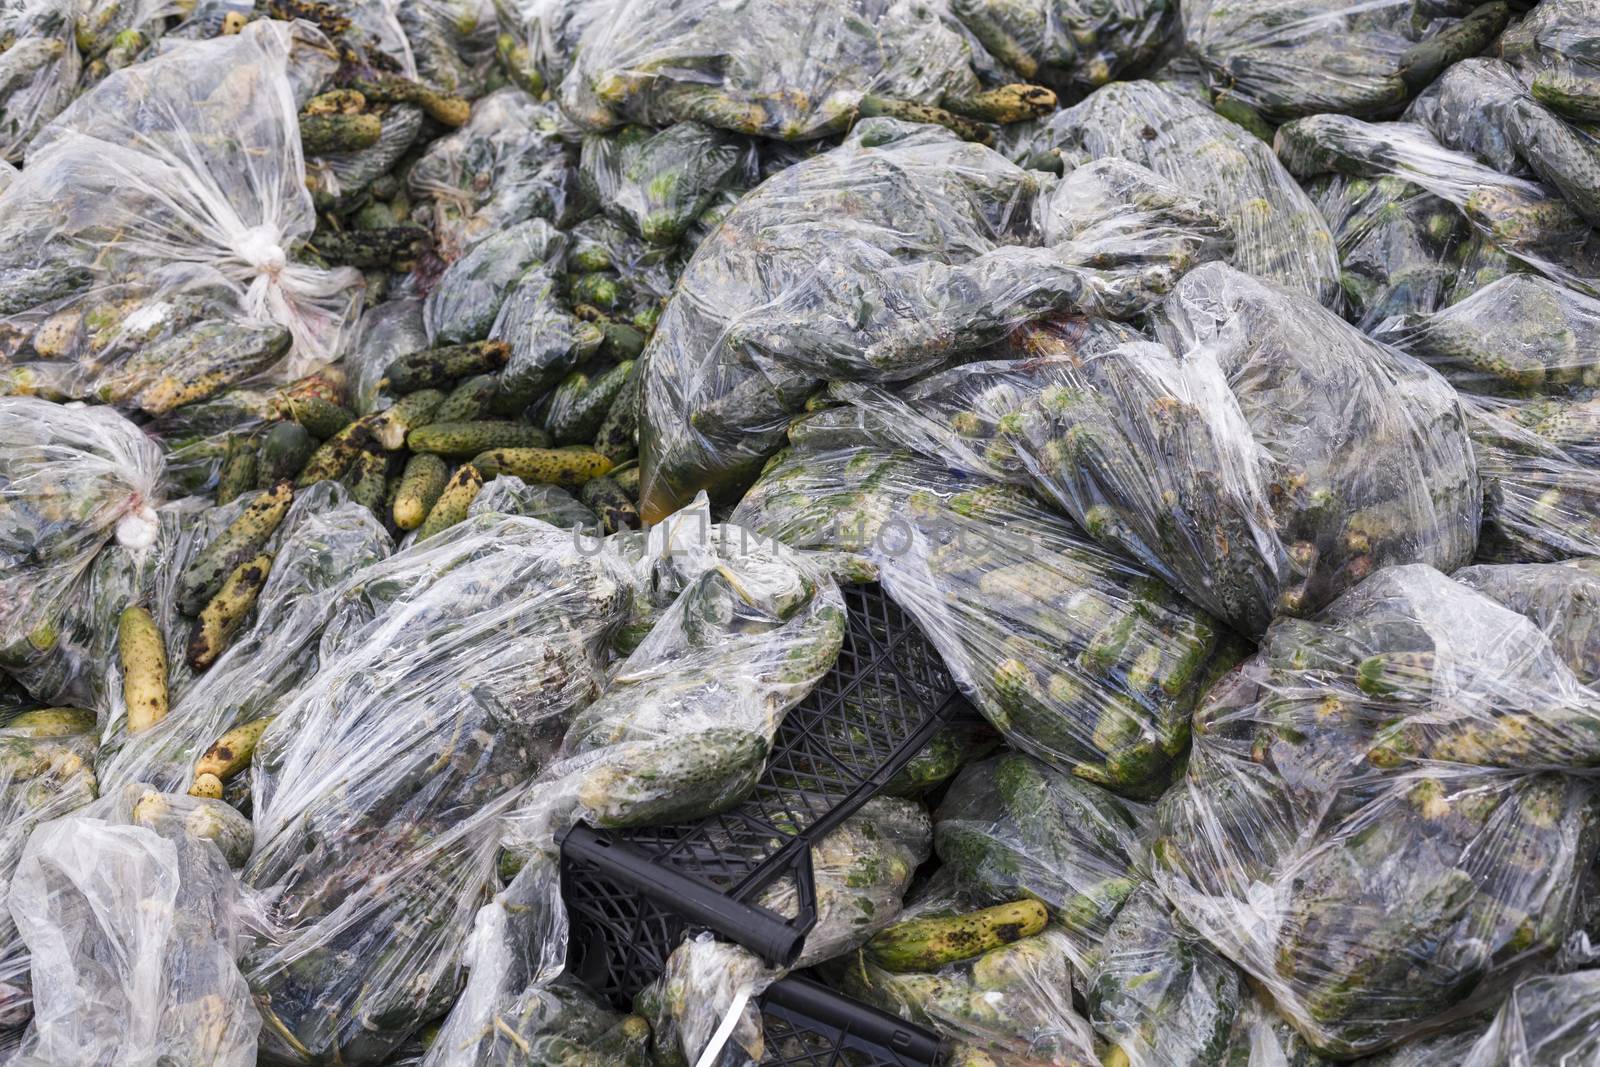 Rotten cucumbers in plastic sacks on the landfill by rootstocks